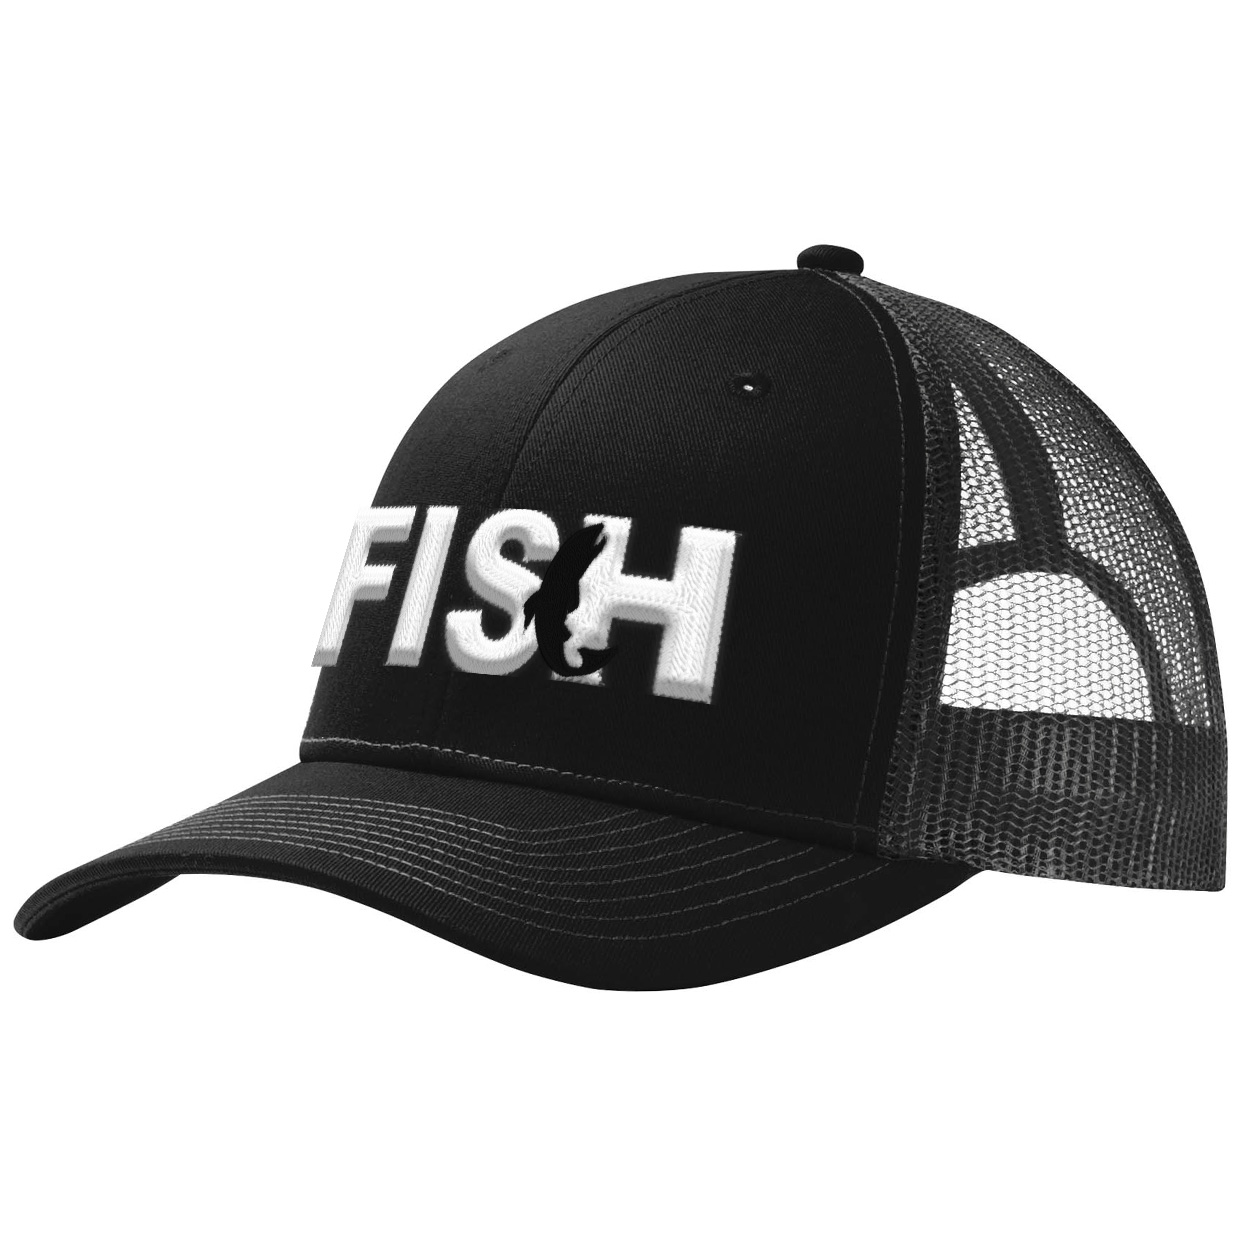 Fish Catch Logo Classic Pro 3D Puff Embroidered Snapback Trucker Hat Black/Gray